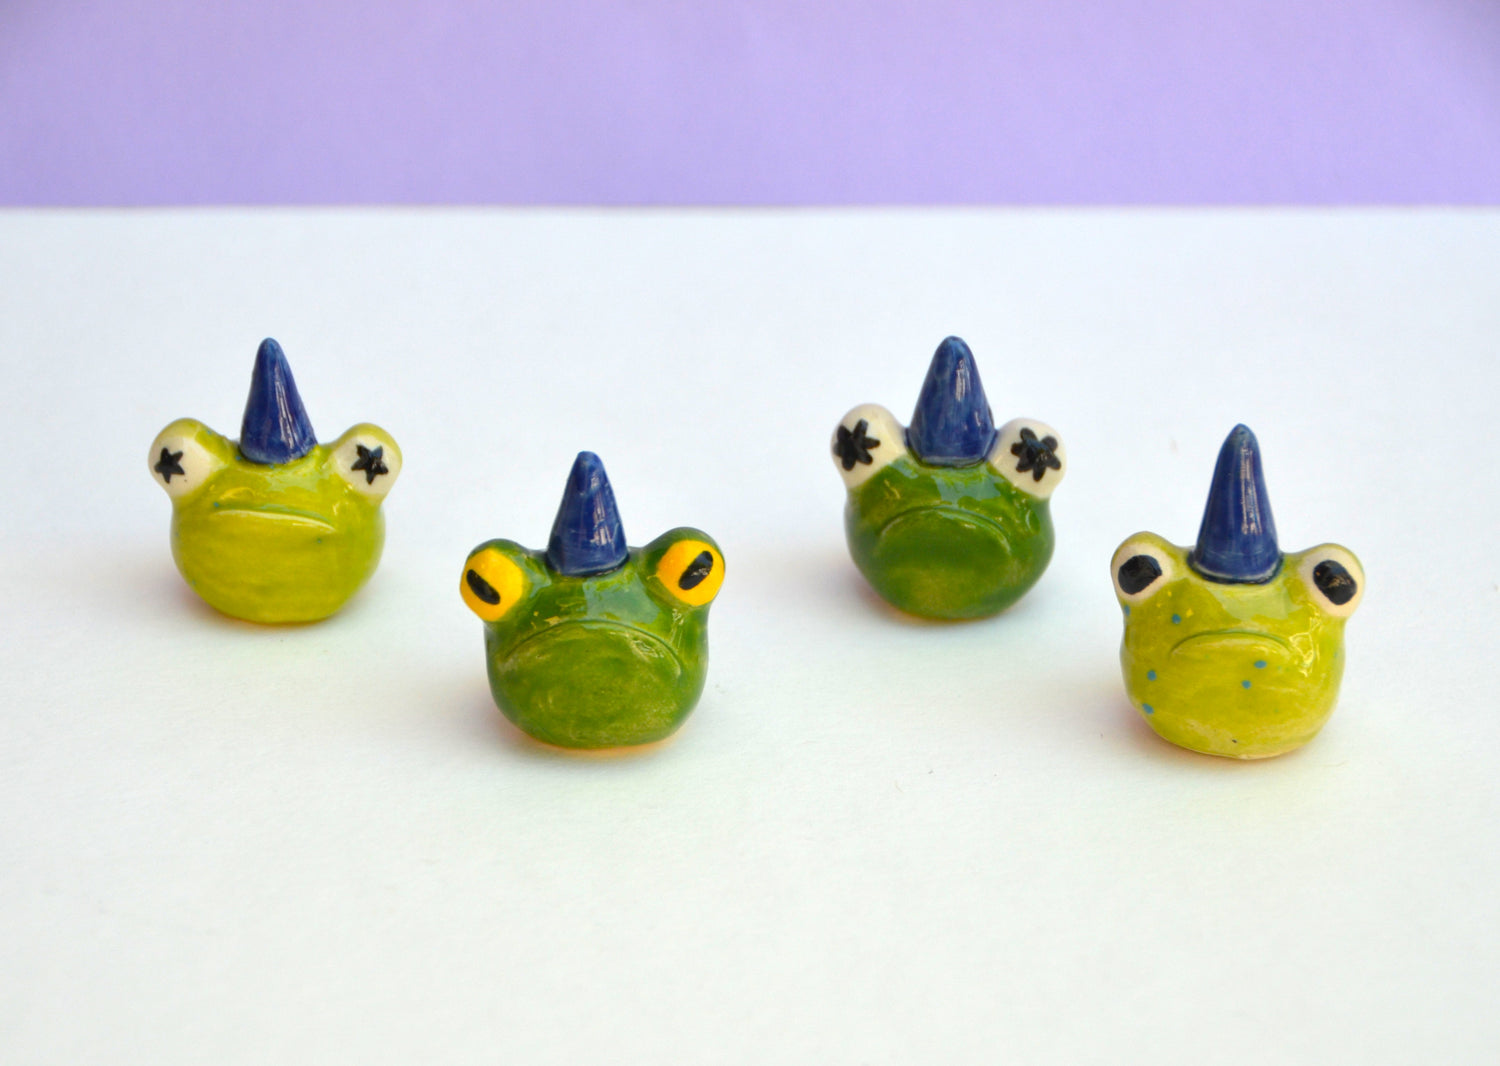 4 miniature frog heads all wearing dark blue wizard hats. Each frog has a different eye and pupil design.